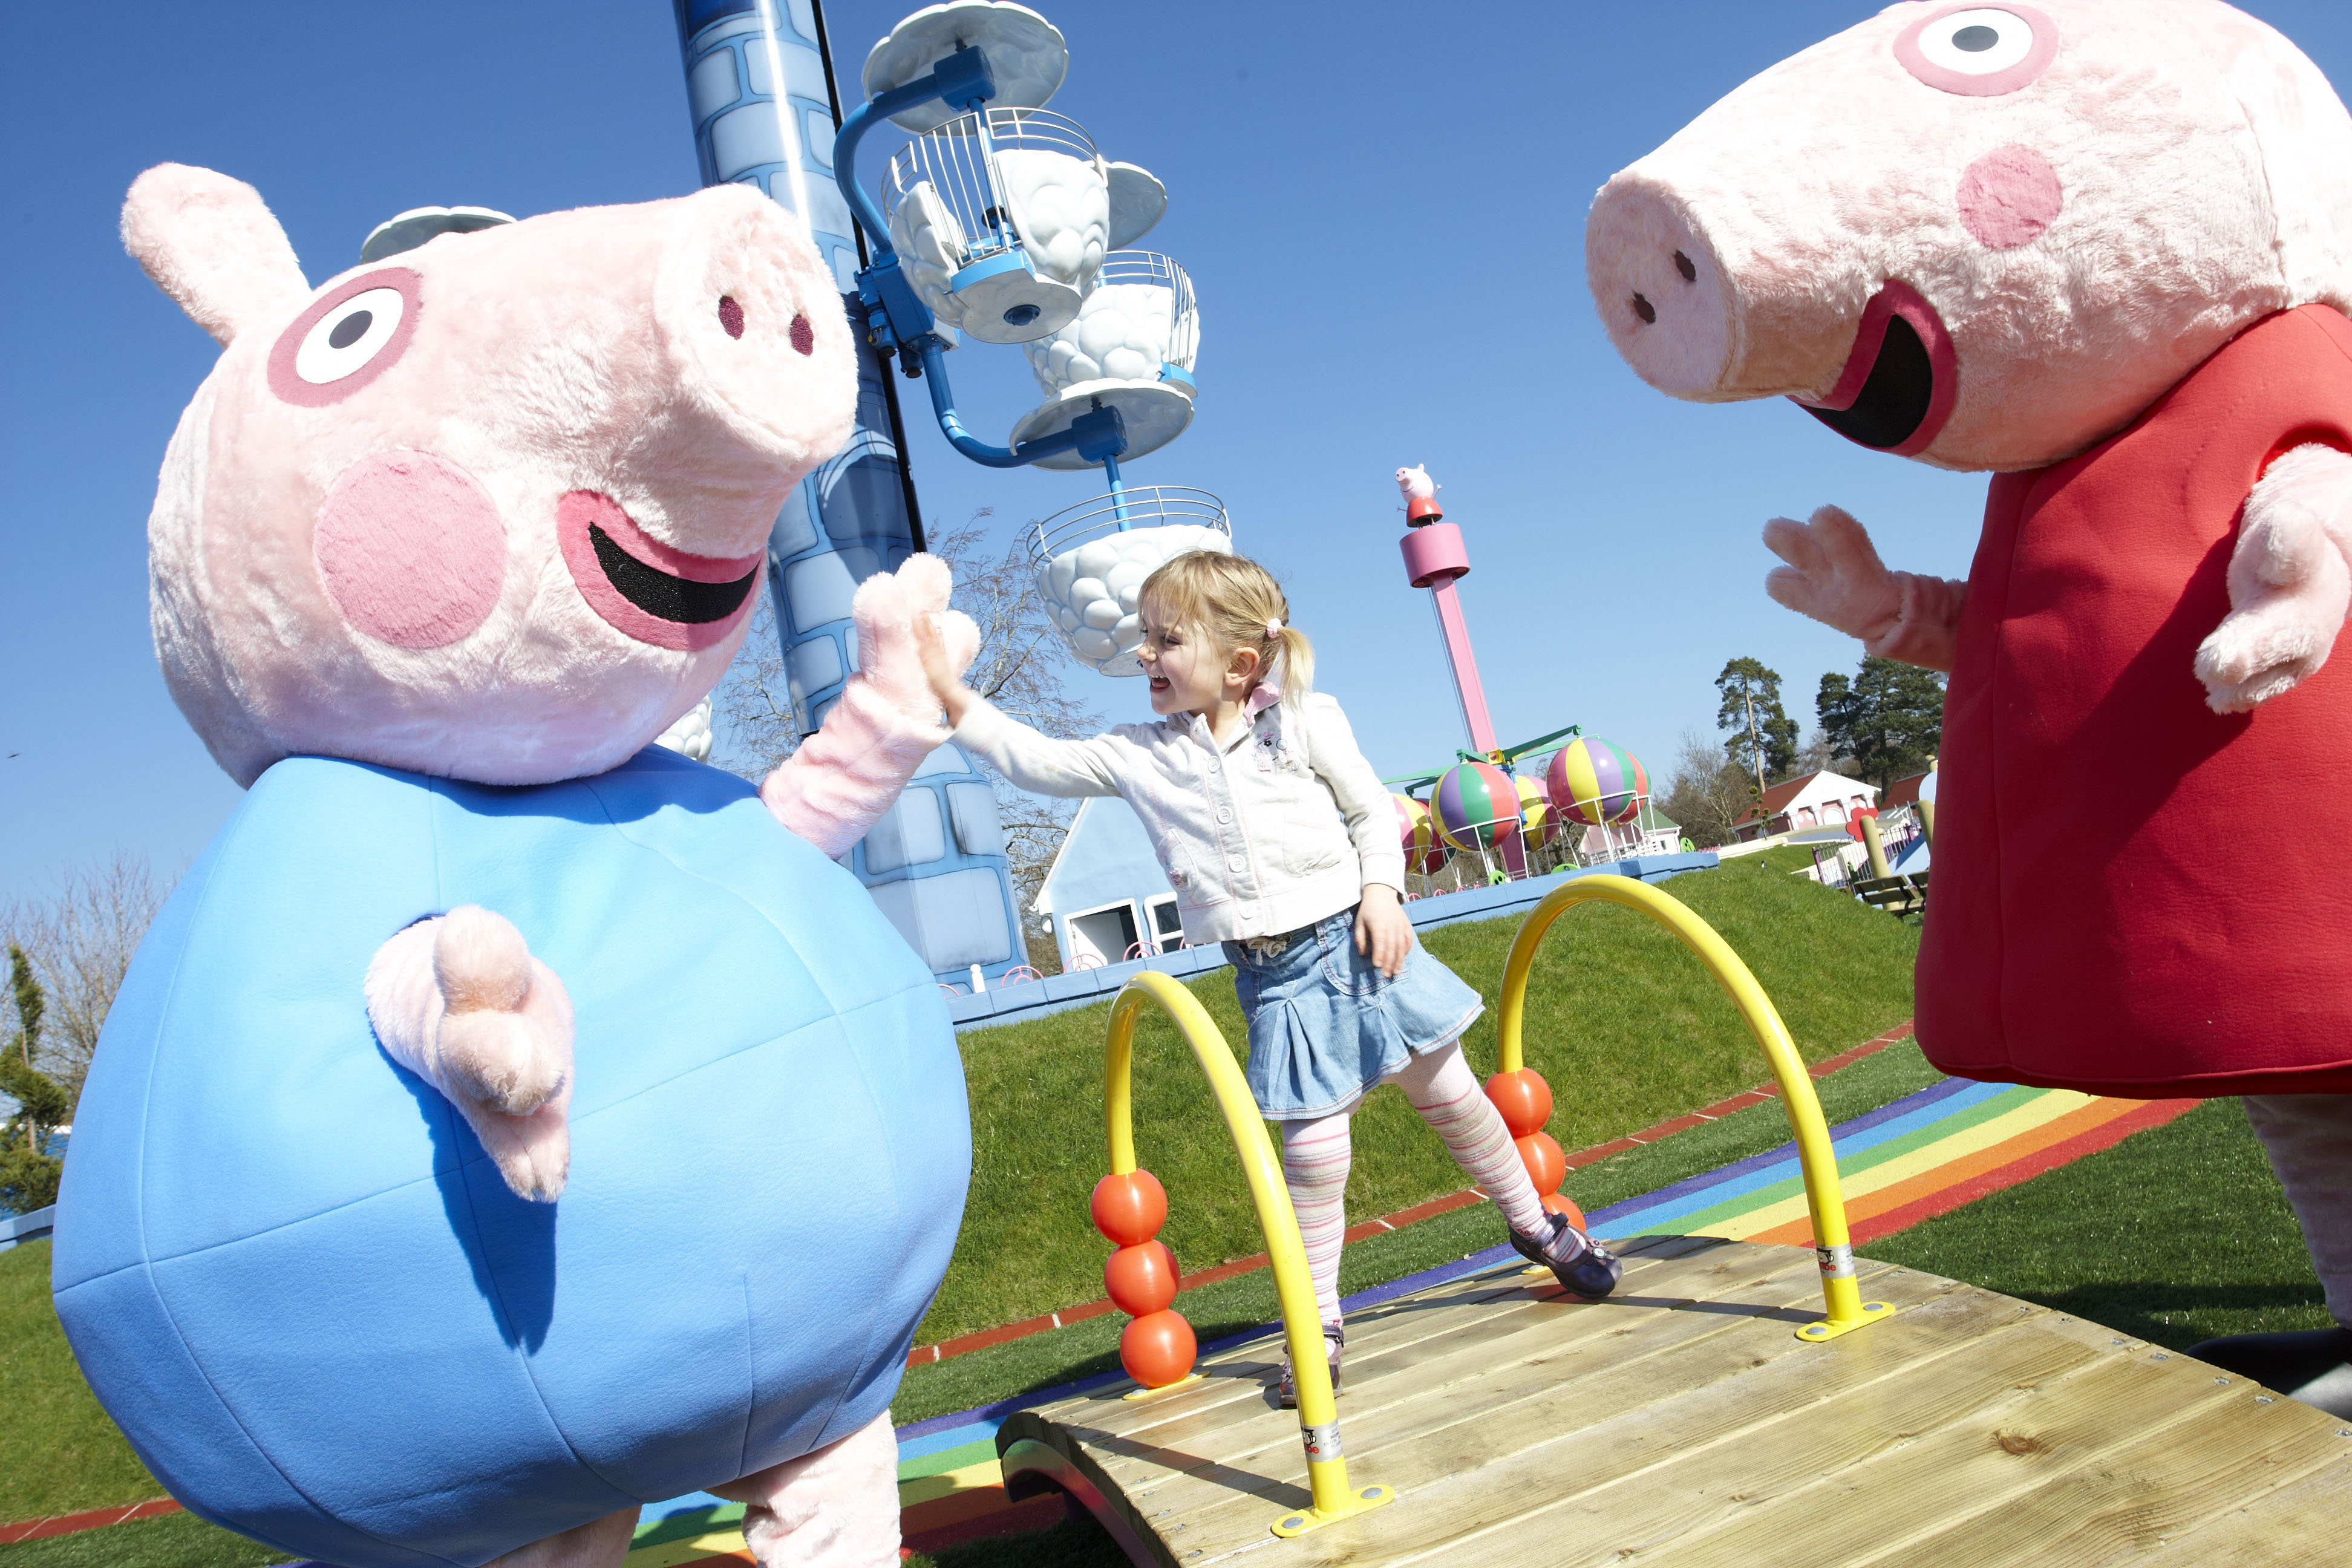 Peppa Pig World is not solely for toddlers